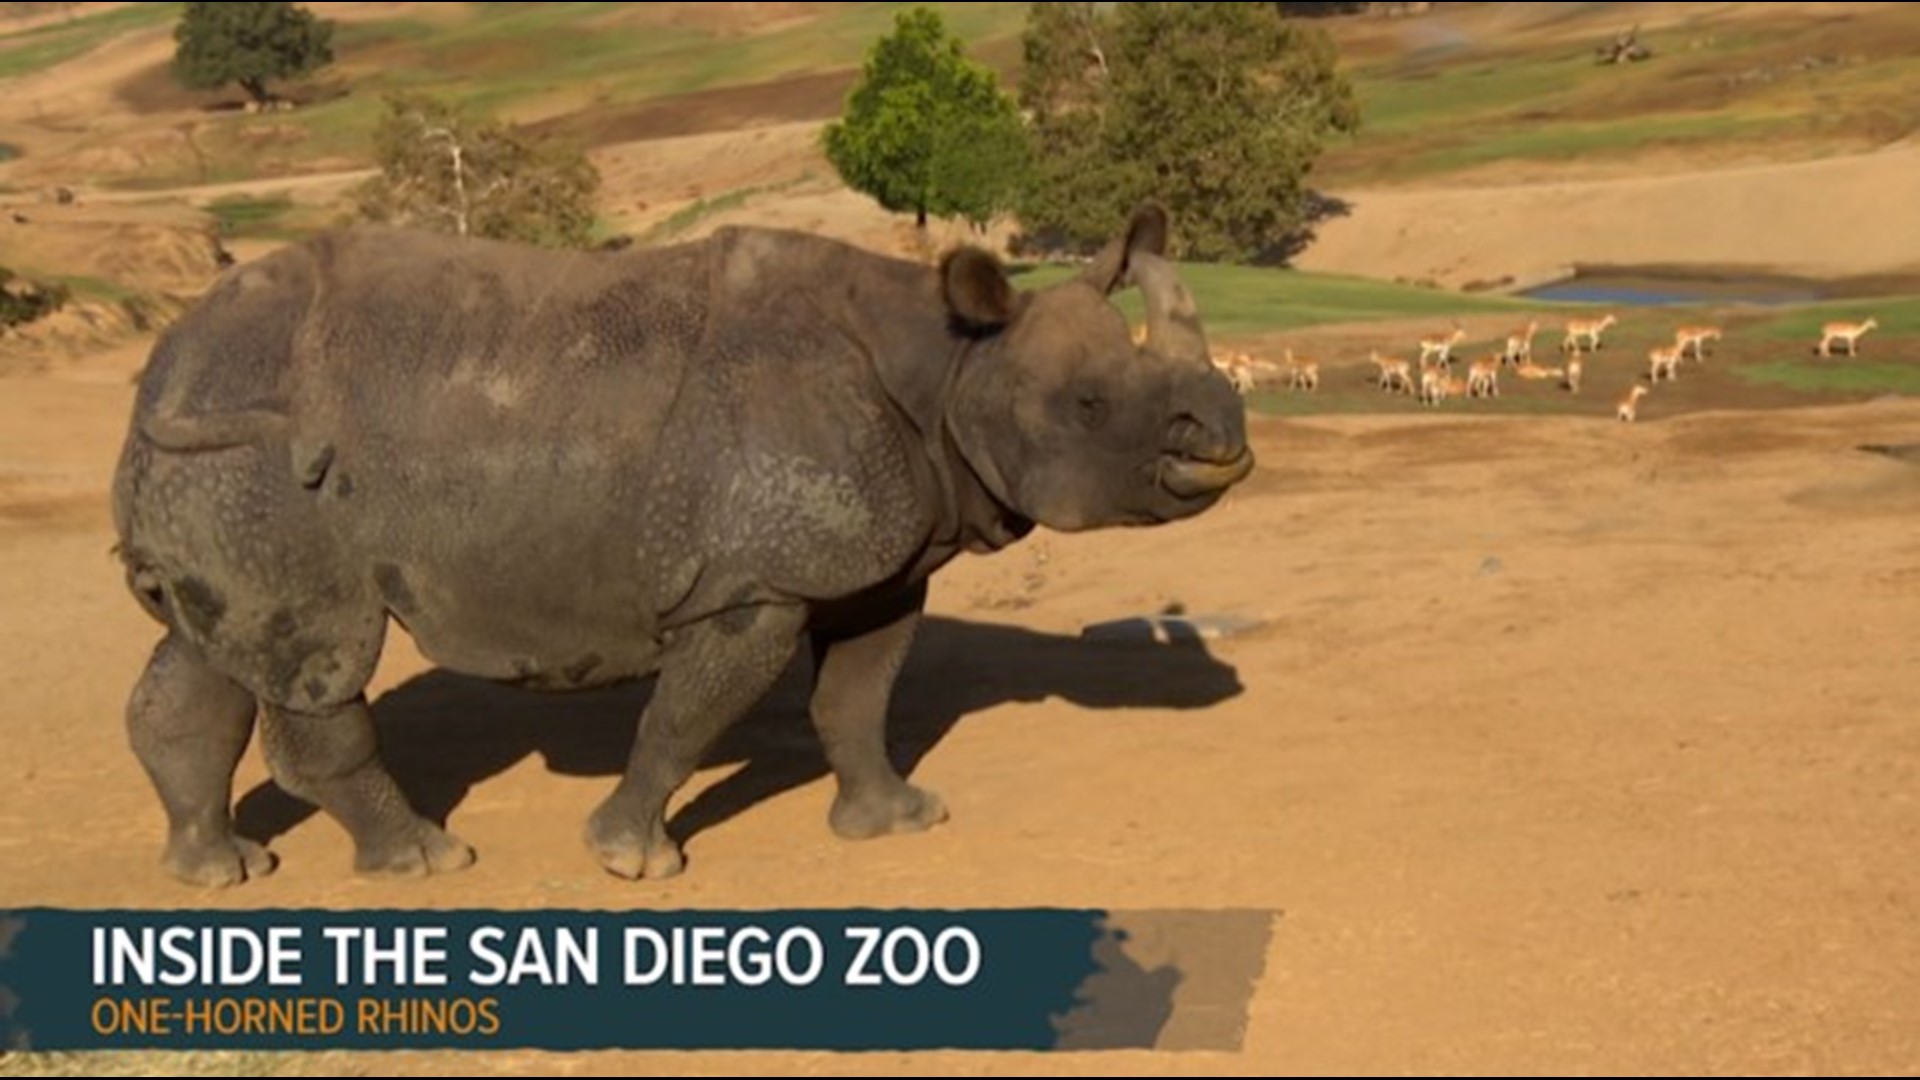 As the San Diego Zoo celebrates 50 years, KFMB's Neda Iranpour goes inside the Safari Park to introduce us to animals benefiting from their conservation work.